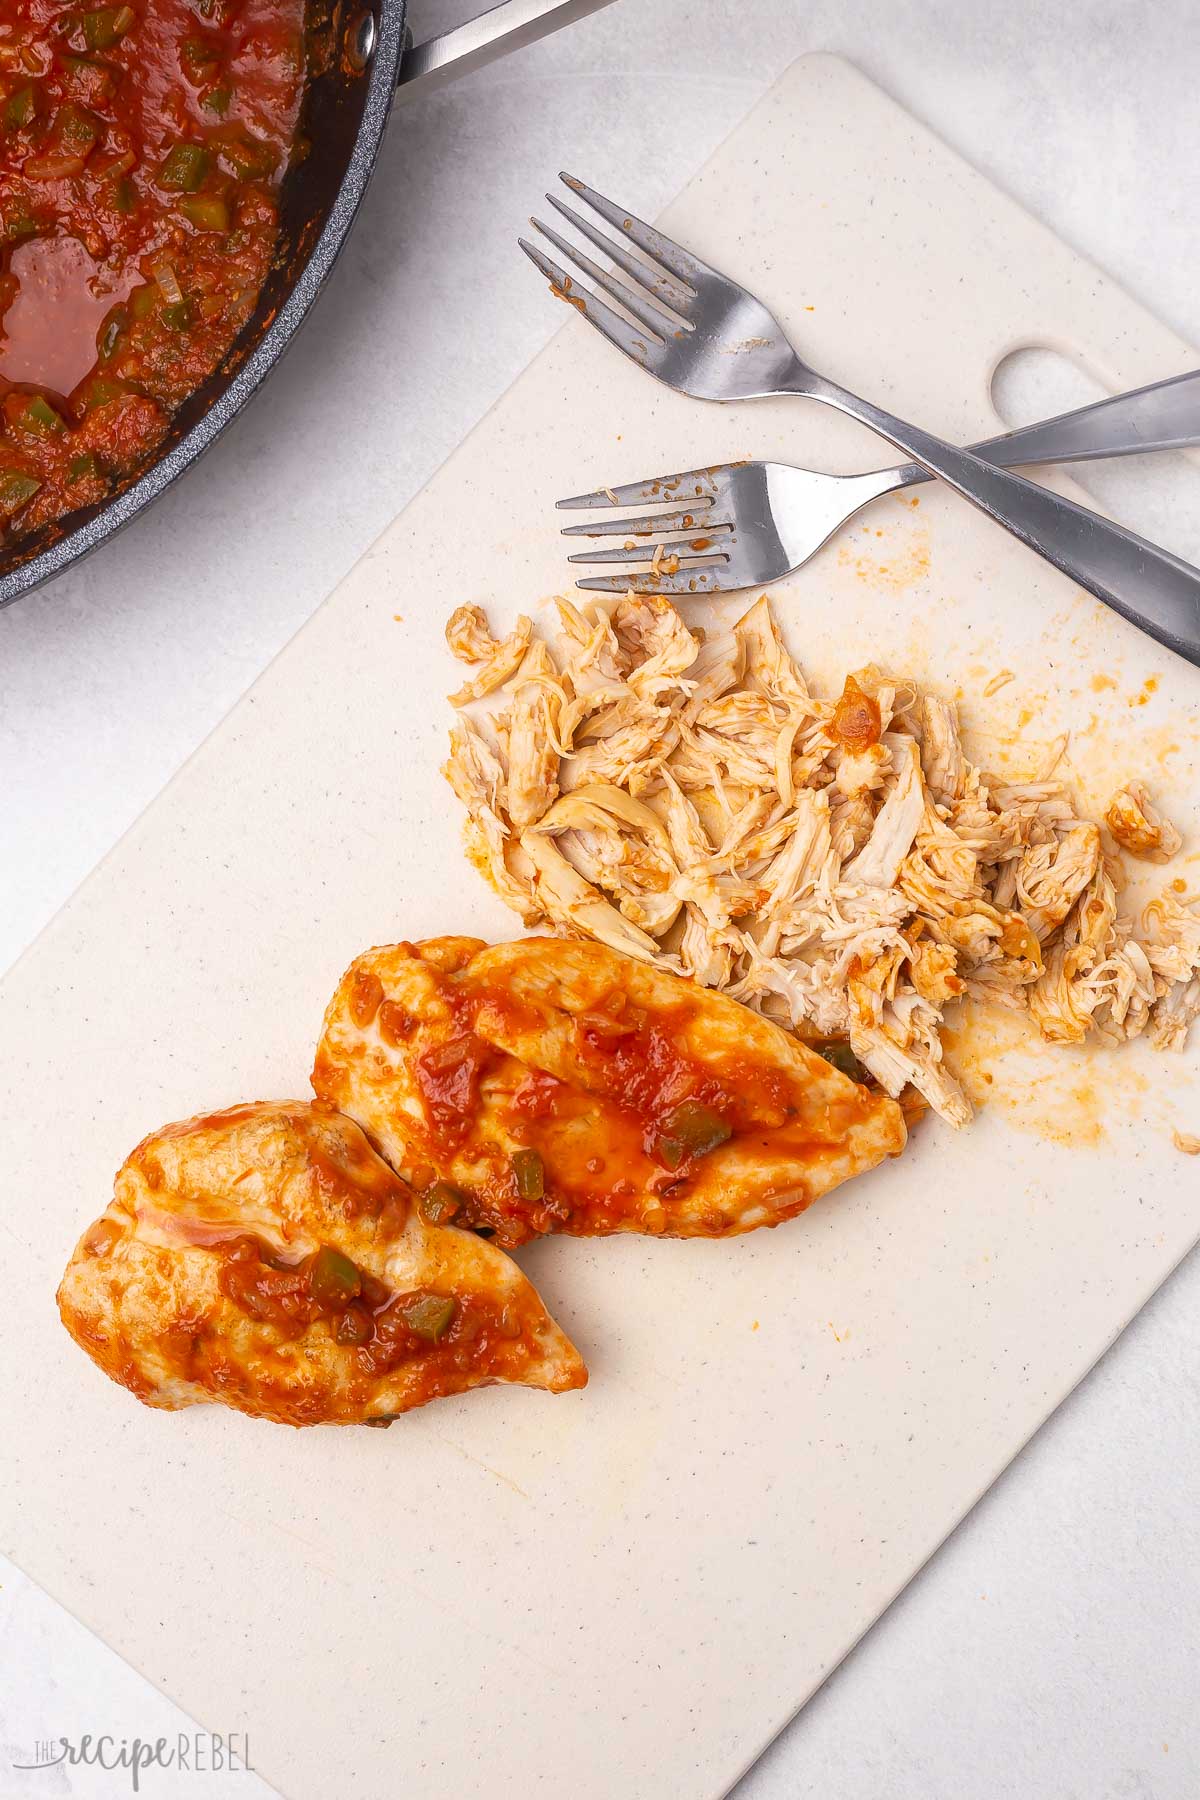 two cooked chicken breasts and shredded chicken on a cutting board.